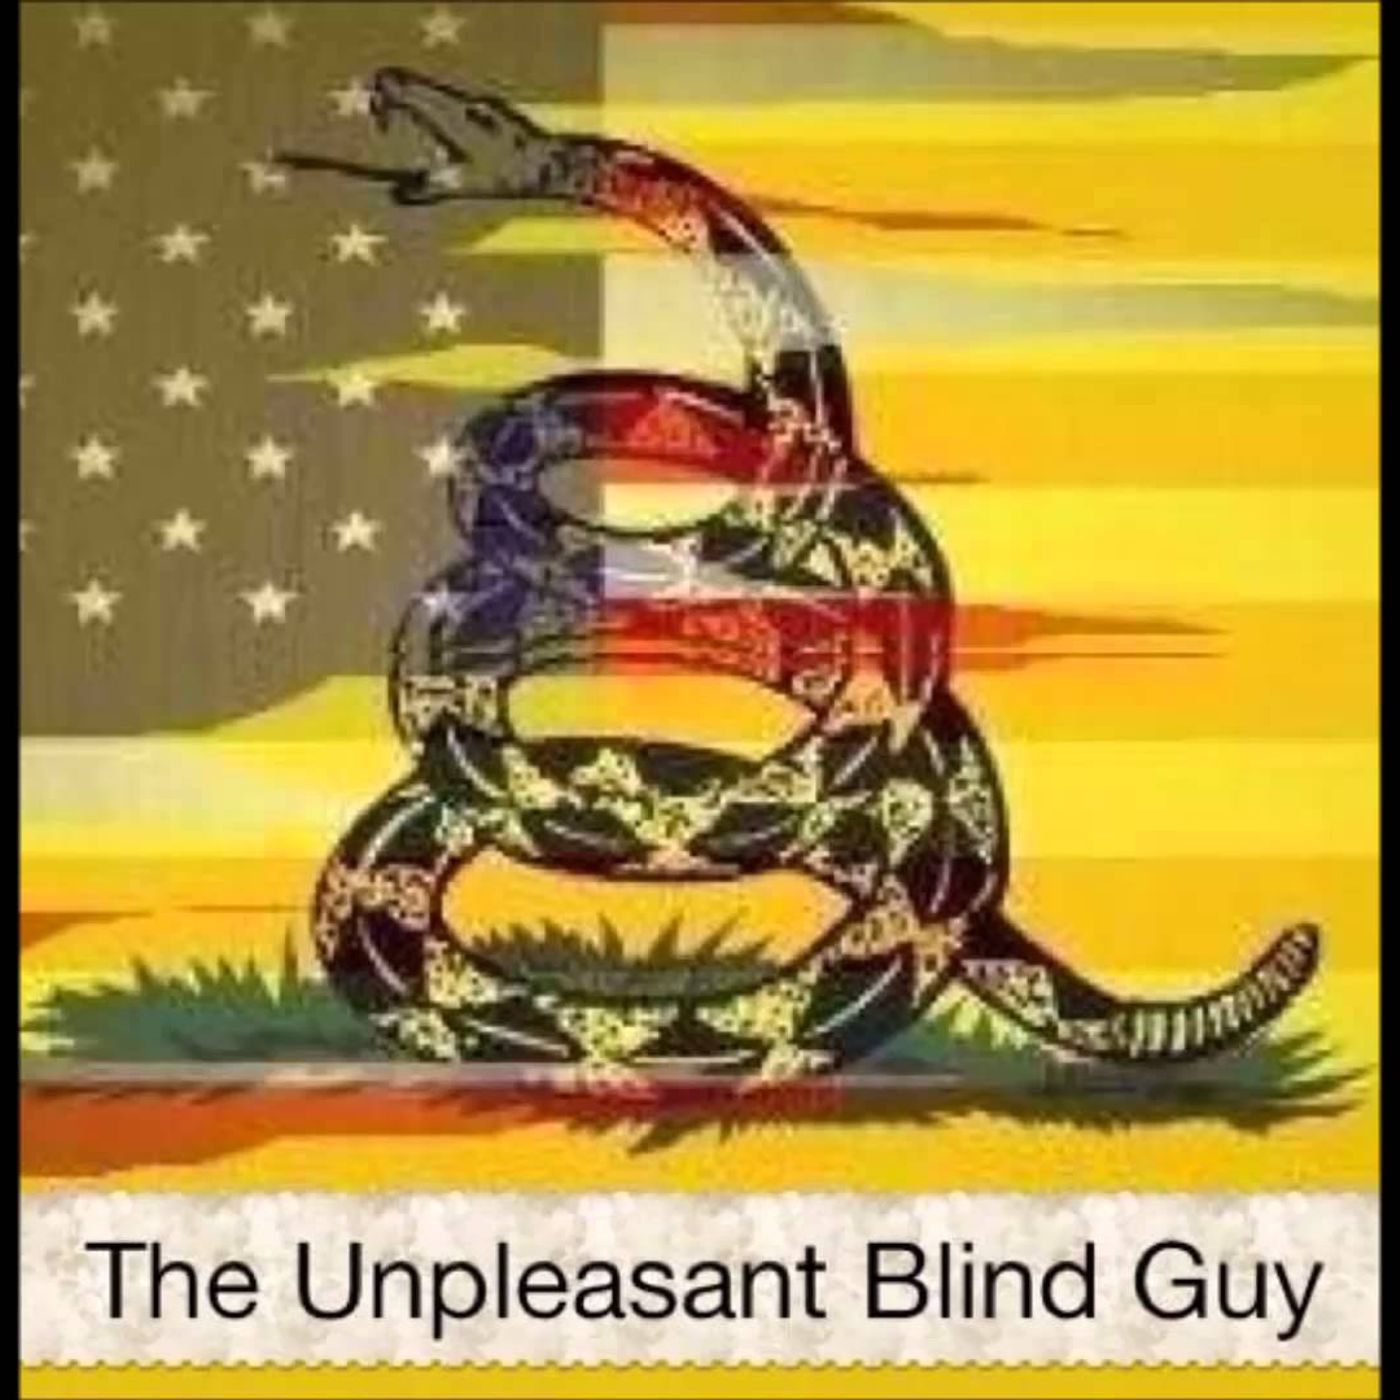 The Unpleasant Blind Guy